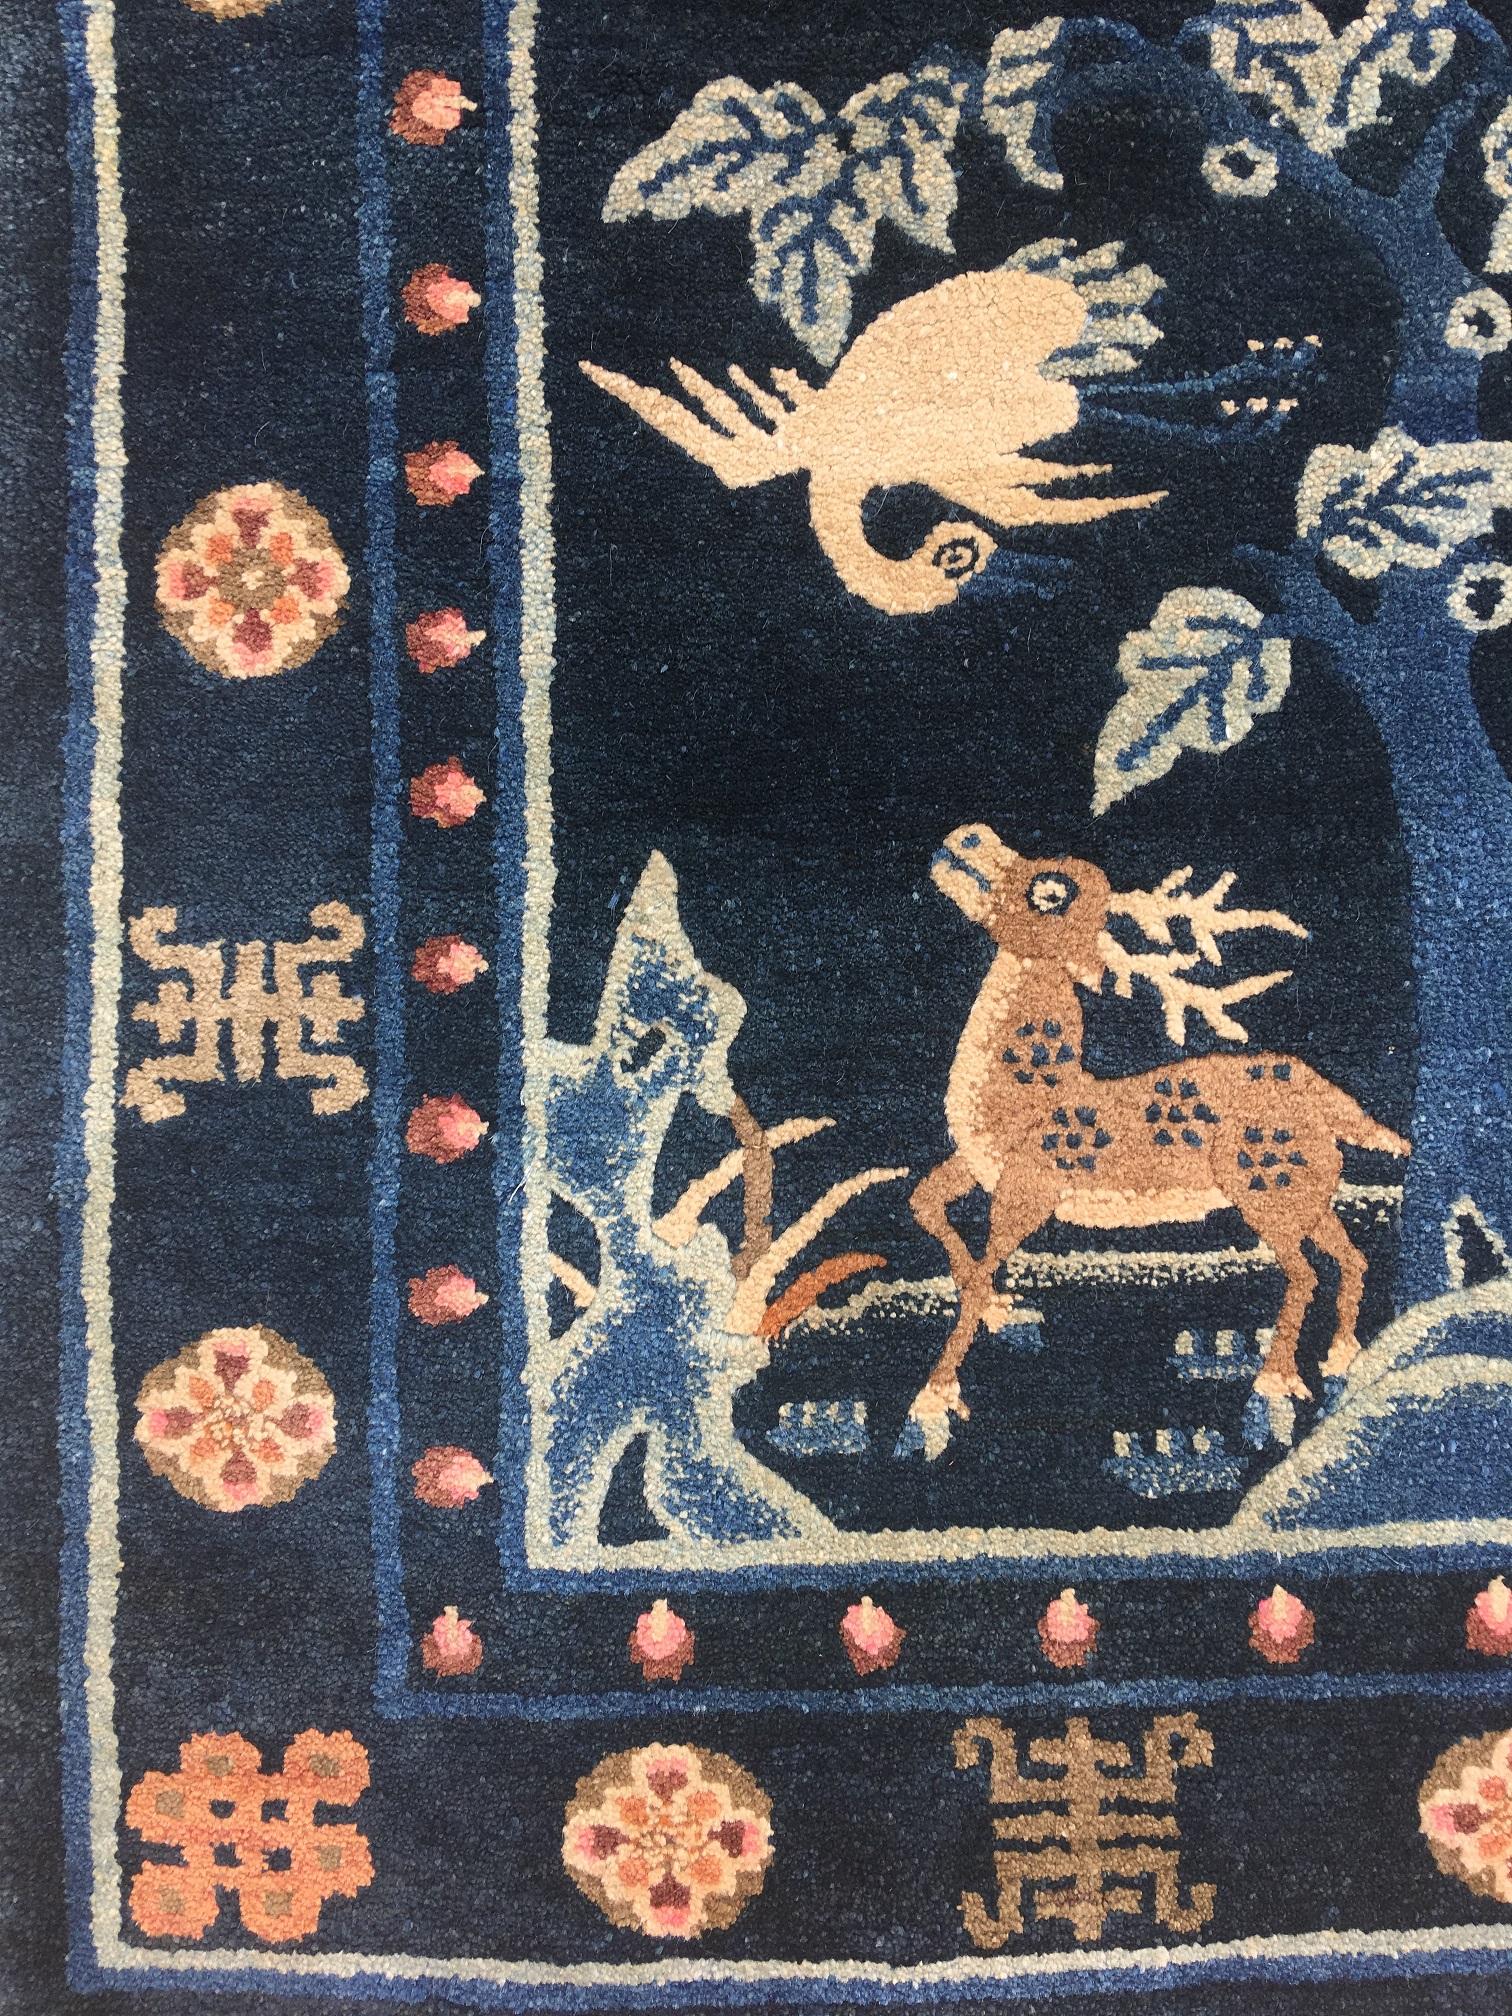 A lovely Pao-Tao rug, handwoven in China, circa 1940 with a mirrored design featuring a crane above a spotted deer, both symbols of longevity, on a navy blue field. Measures: 1.39m x 0.70m.